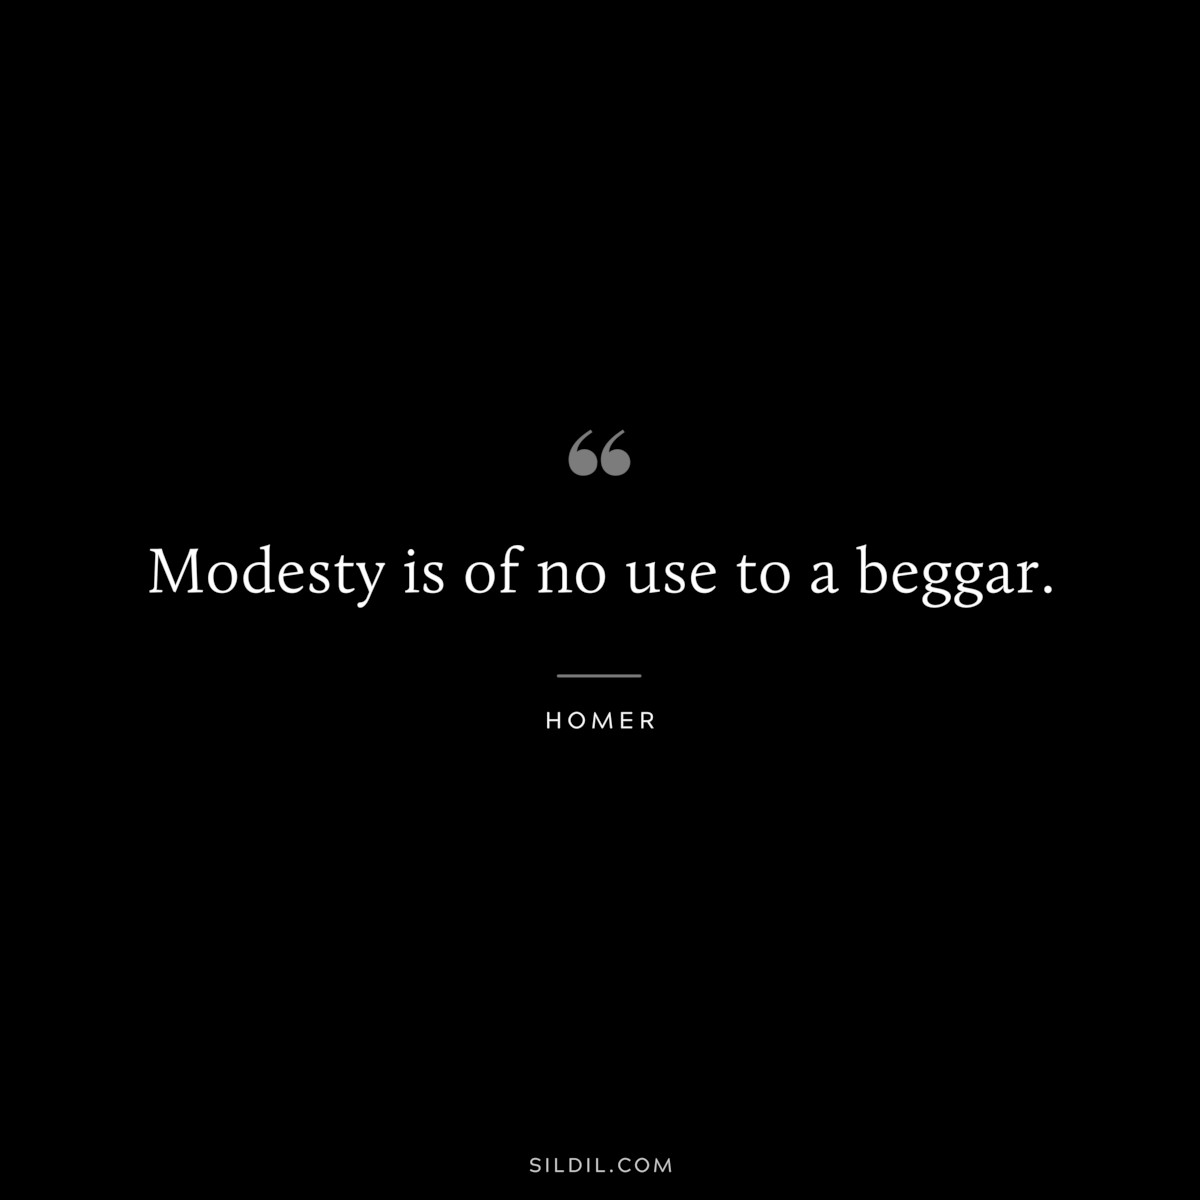 Modesty is of no use to a beggar. ― Homer